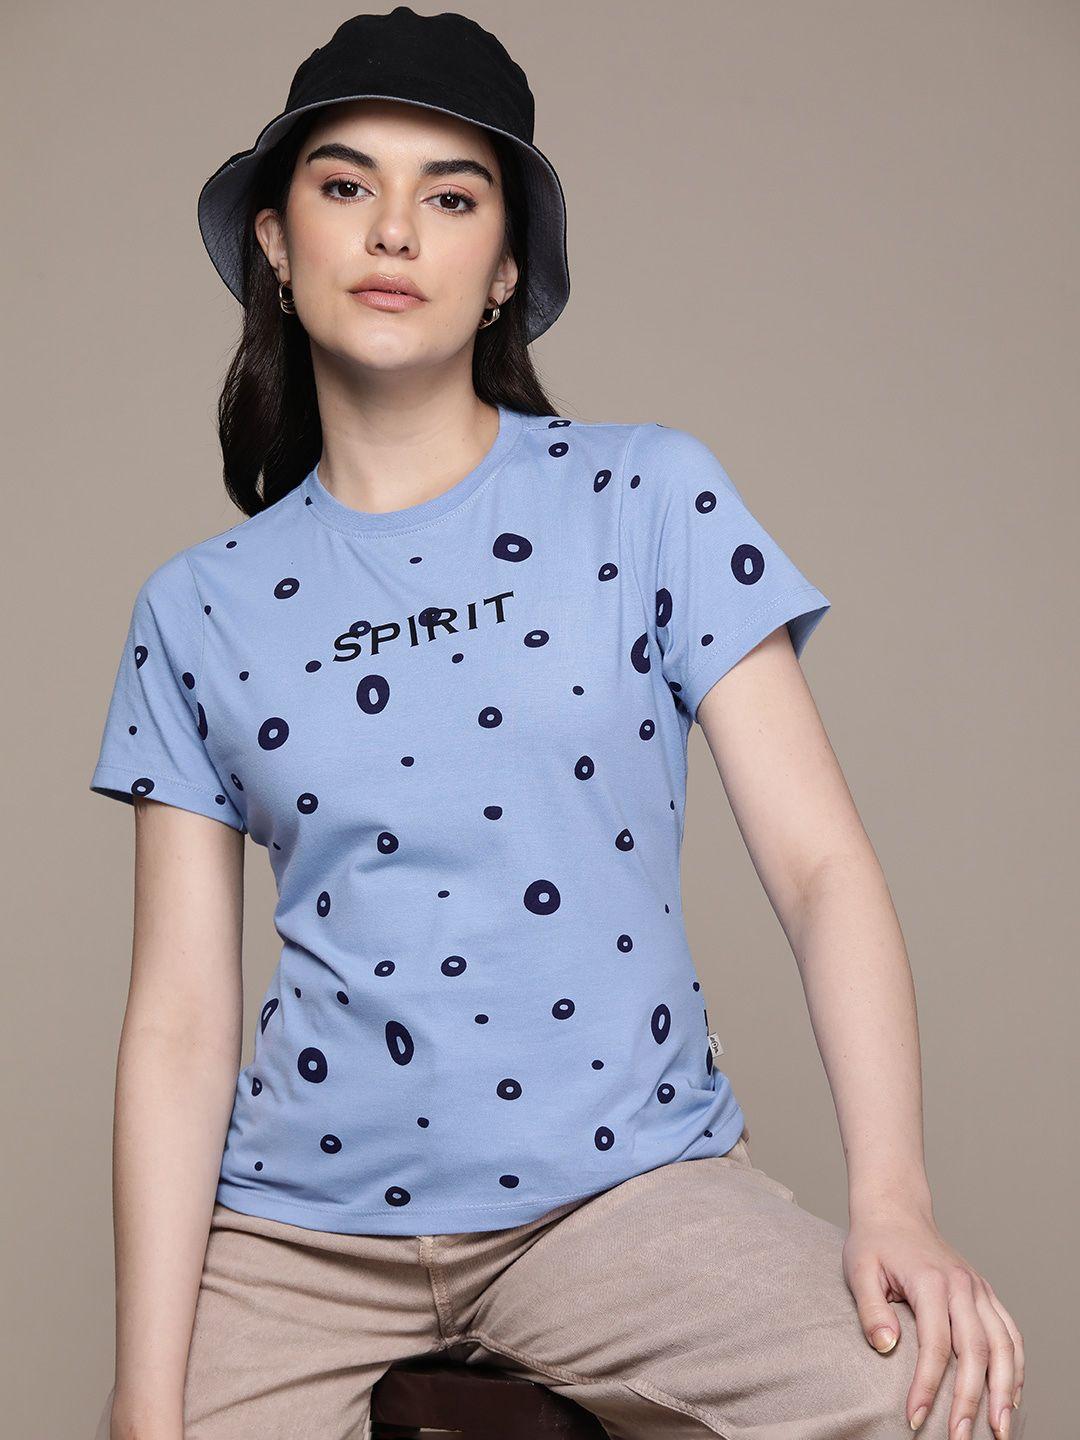 the roadster lifestyle co. geometric printed t-shirt